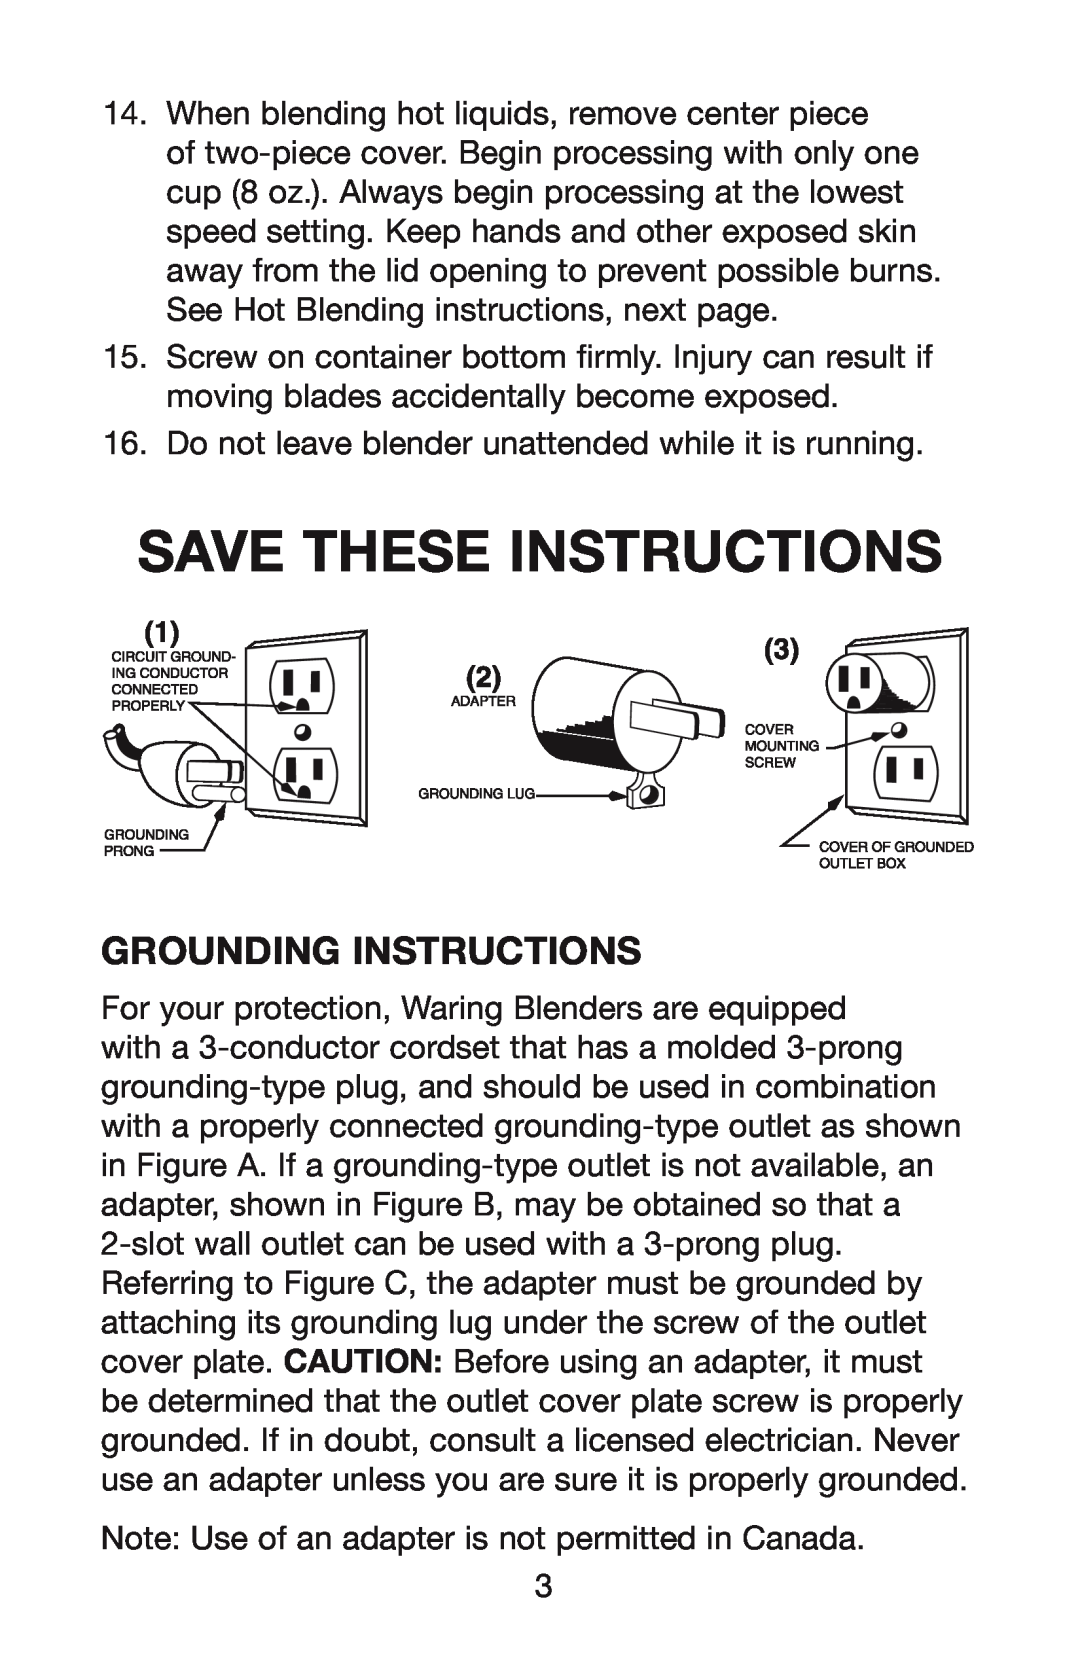 Waring PBB, WPB, MBB manual Save These Instructions, Grounding Instructions 